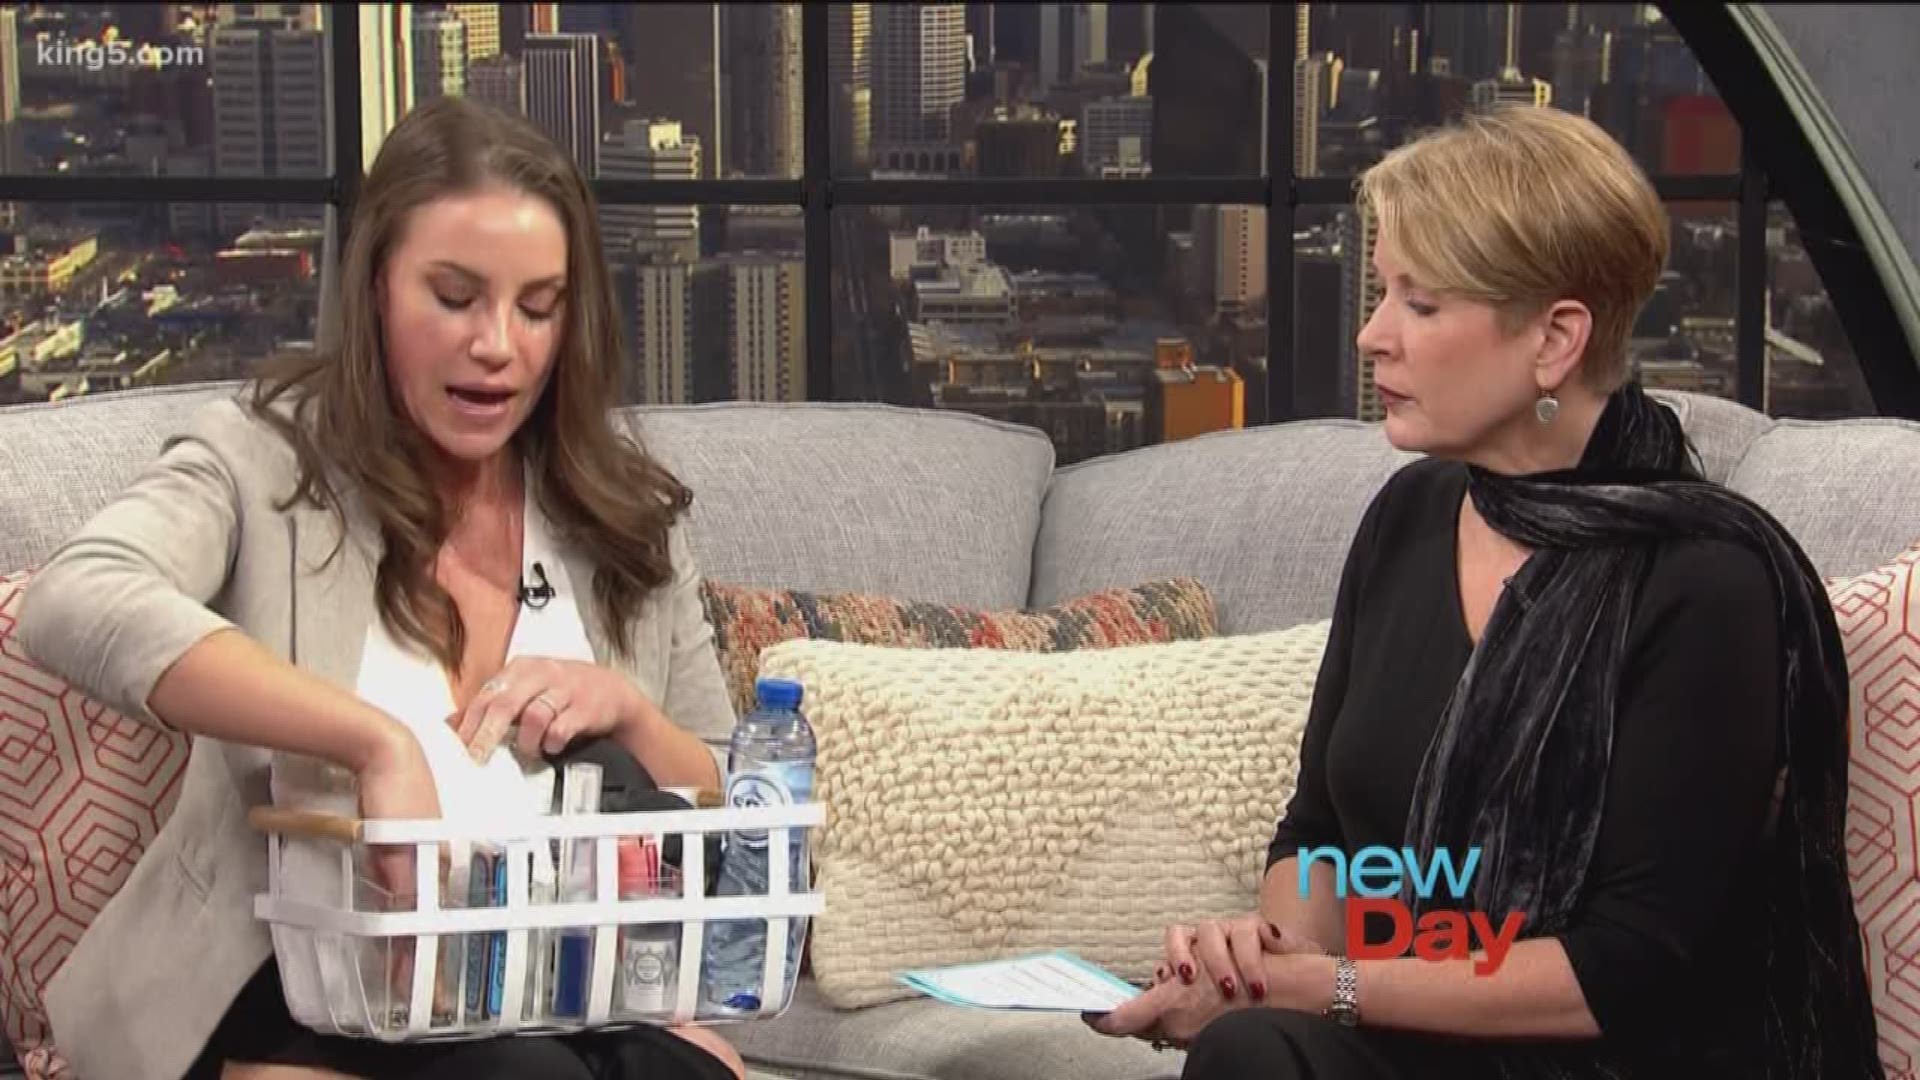 Annie Traurig shares tips to stay prepared for parties this holiday season. 